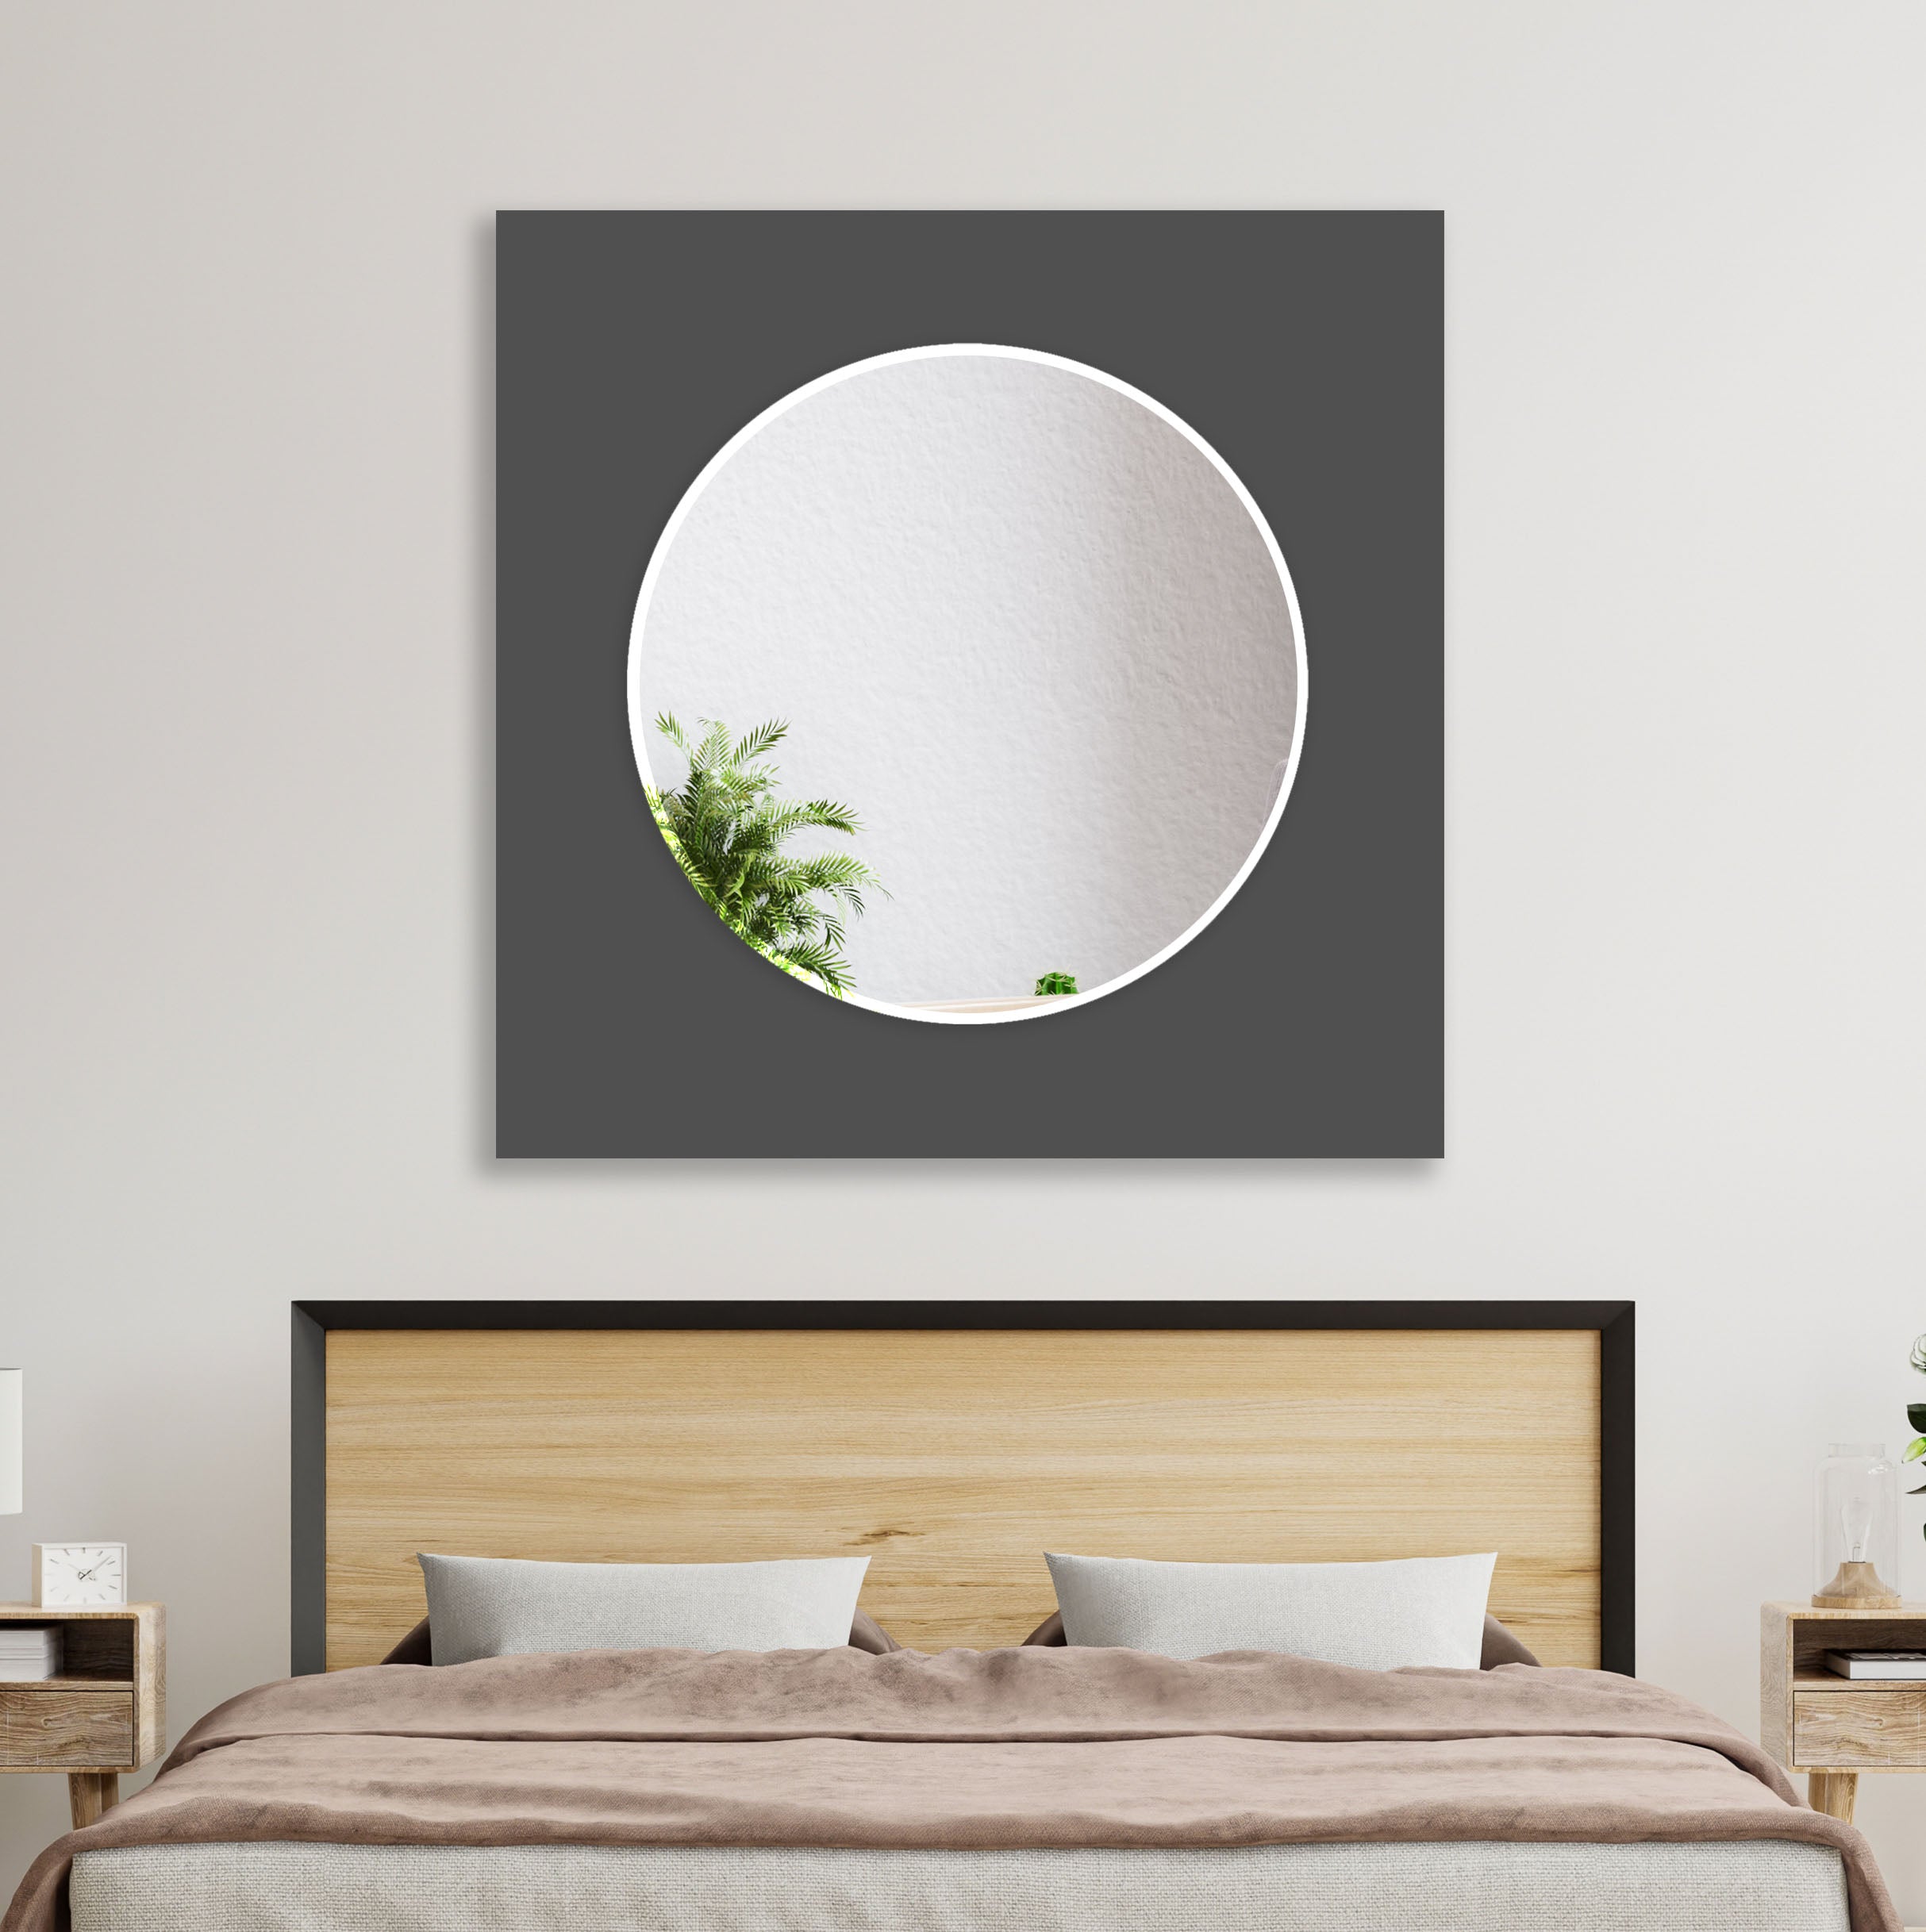 Solid Color Tempered Glass Wall Mirror